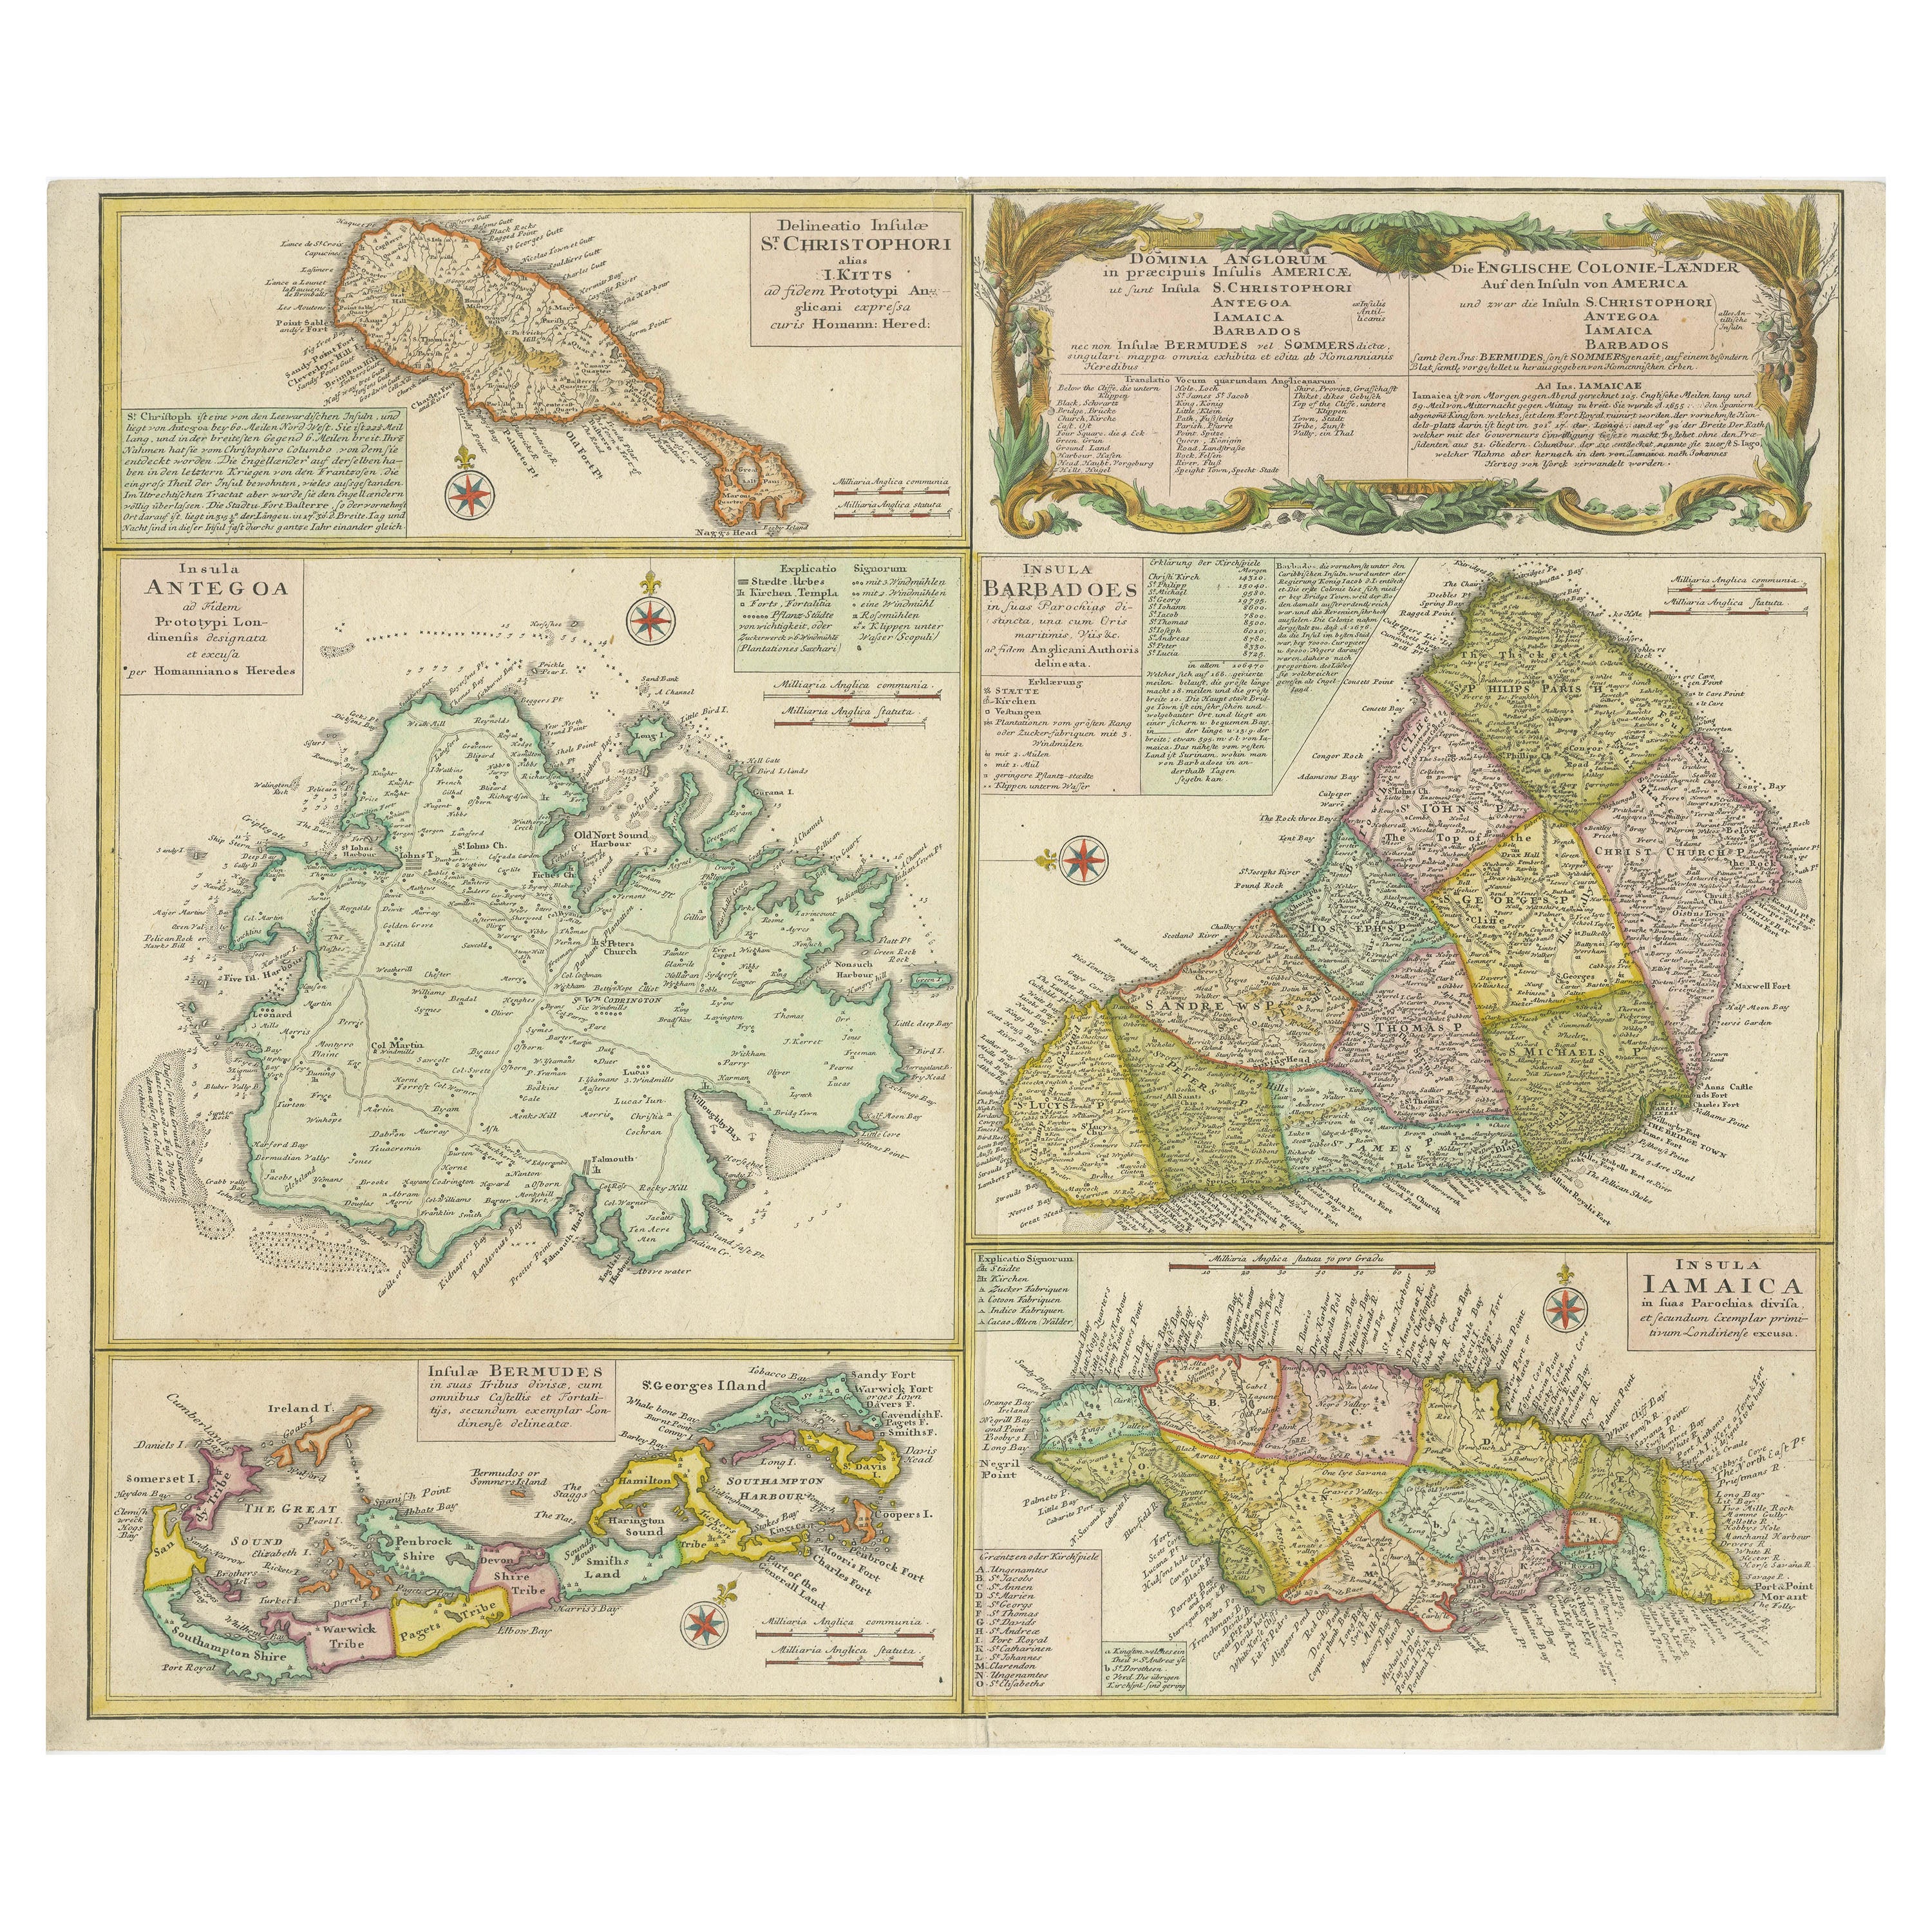 Stunning Map of Caribbean Islands, Incl Jamaica, Bermuda, Barbados and St. Kitts